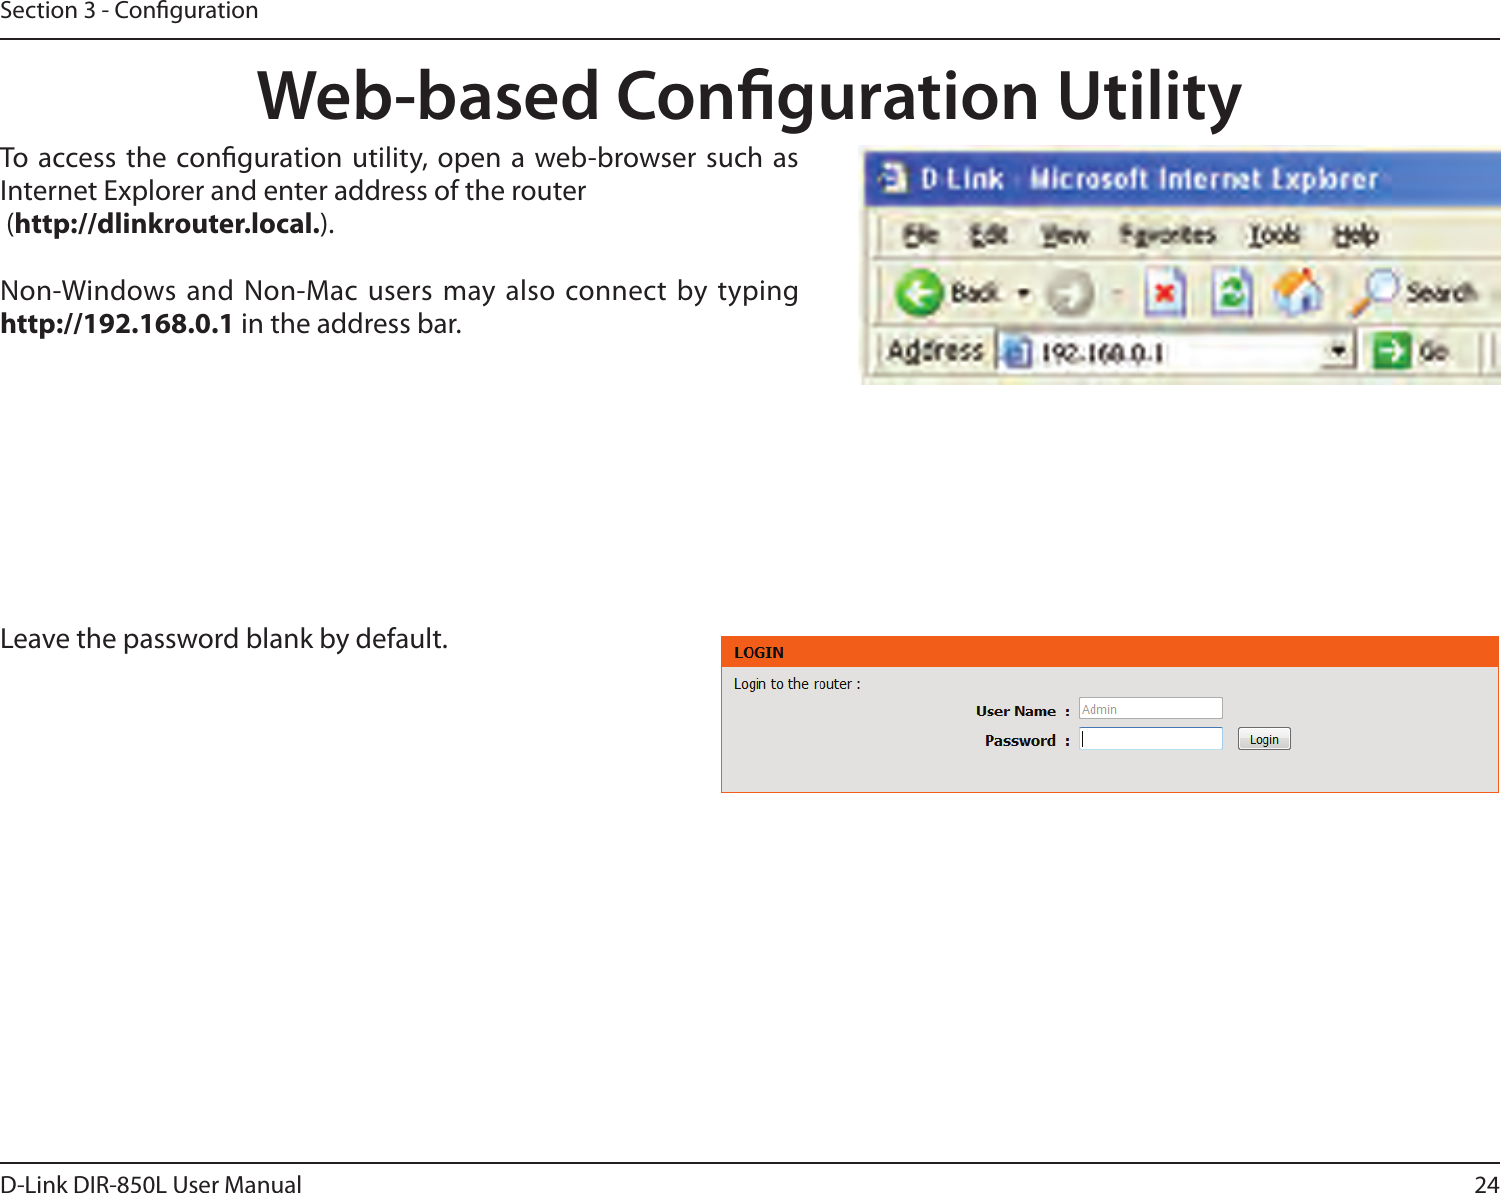 24D-Link DIR-850L User ManualSection 3 - CongurationWeb-based Conguration UtilityLeave the password blank by default.To  access the  conguration utility, open  a web-browser such  as Internet Explorer and enter address of the router (http://dlinkrouter.local.).Non-Windows and  Non-Mac users may also  connect by typing http://192.168.0.1 in the address bar.